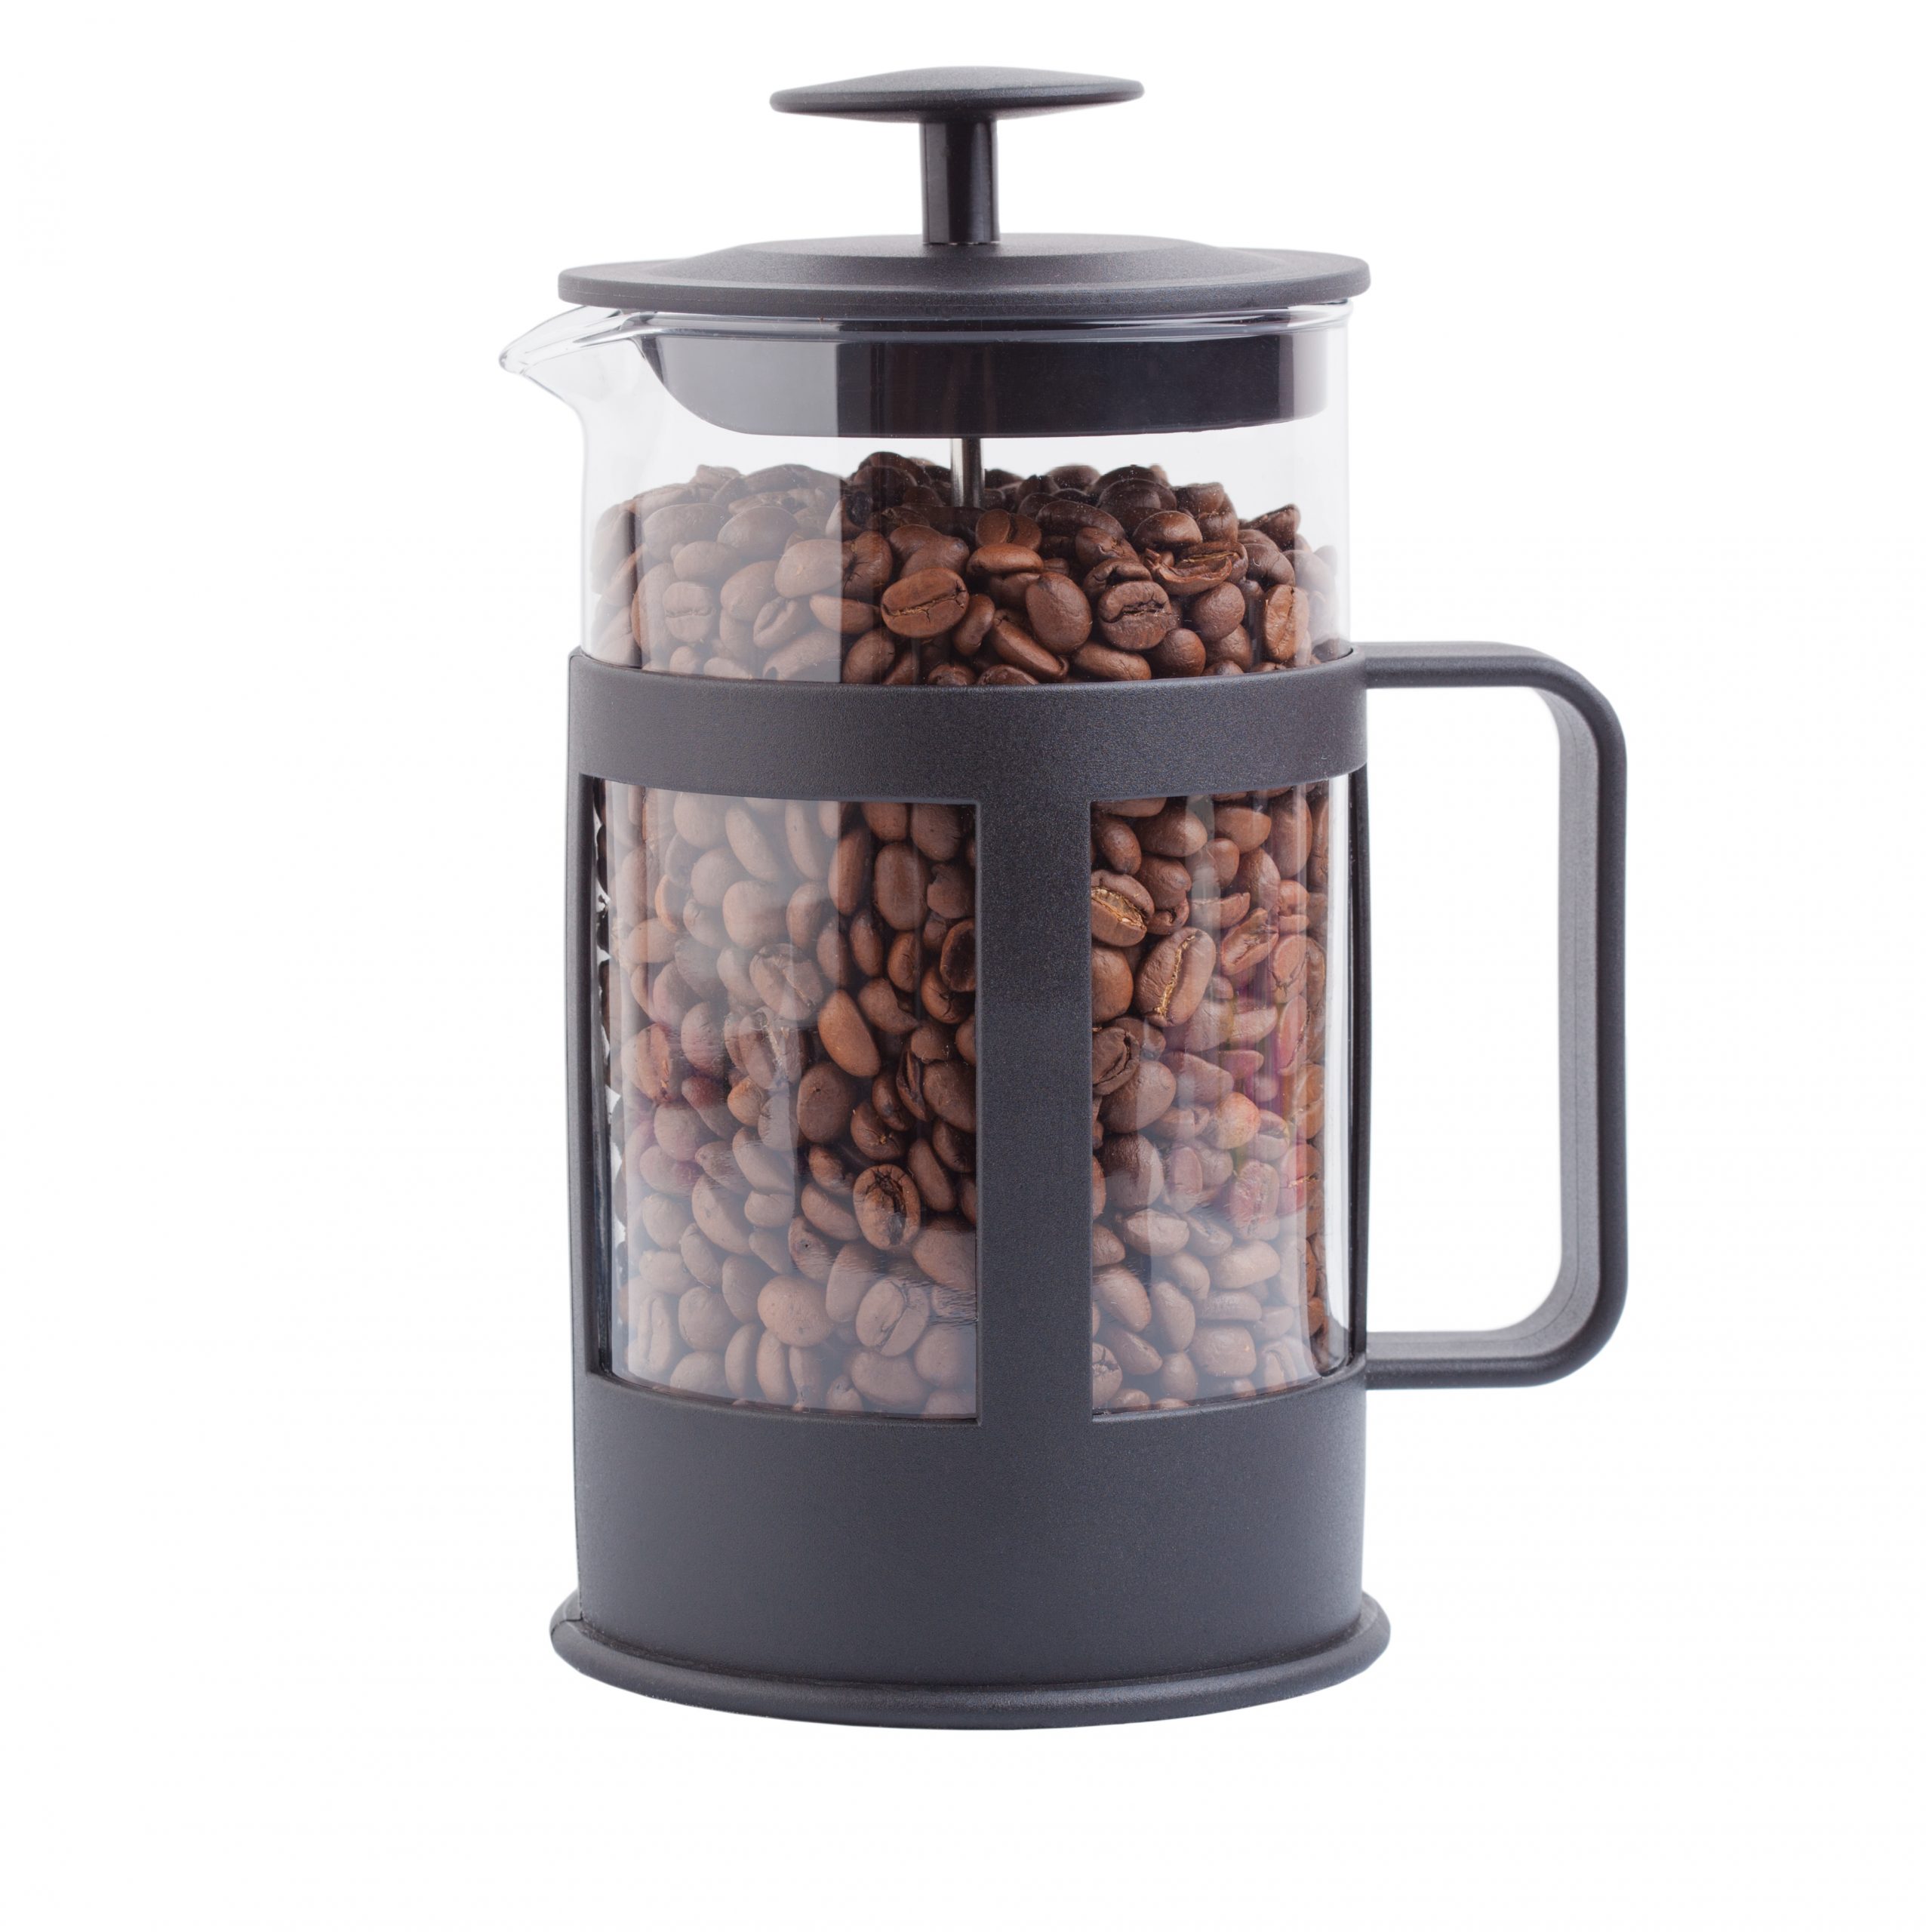 coffee beans in a cafetiere or french press